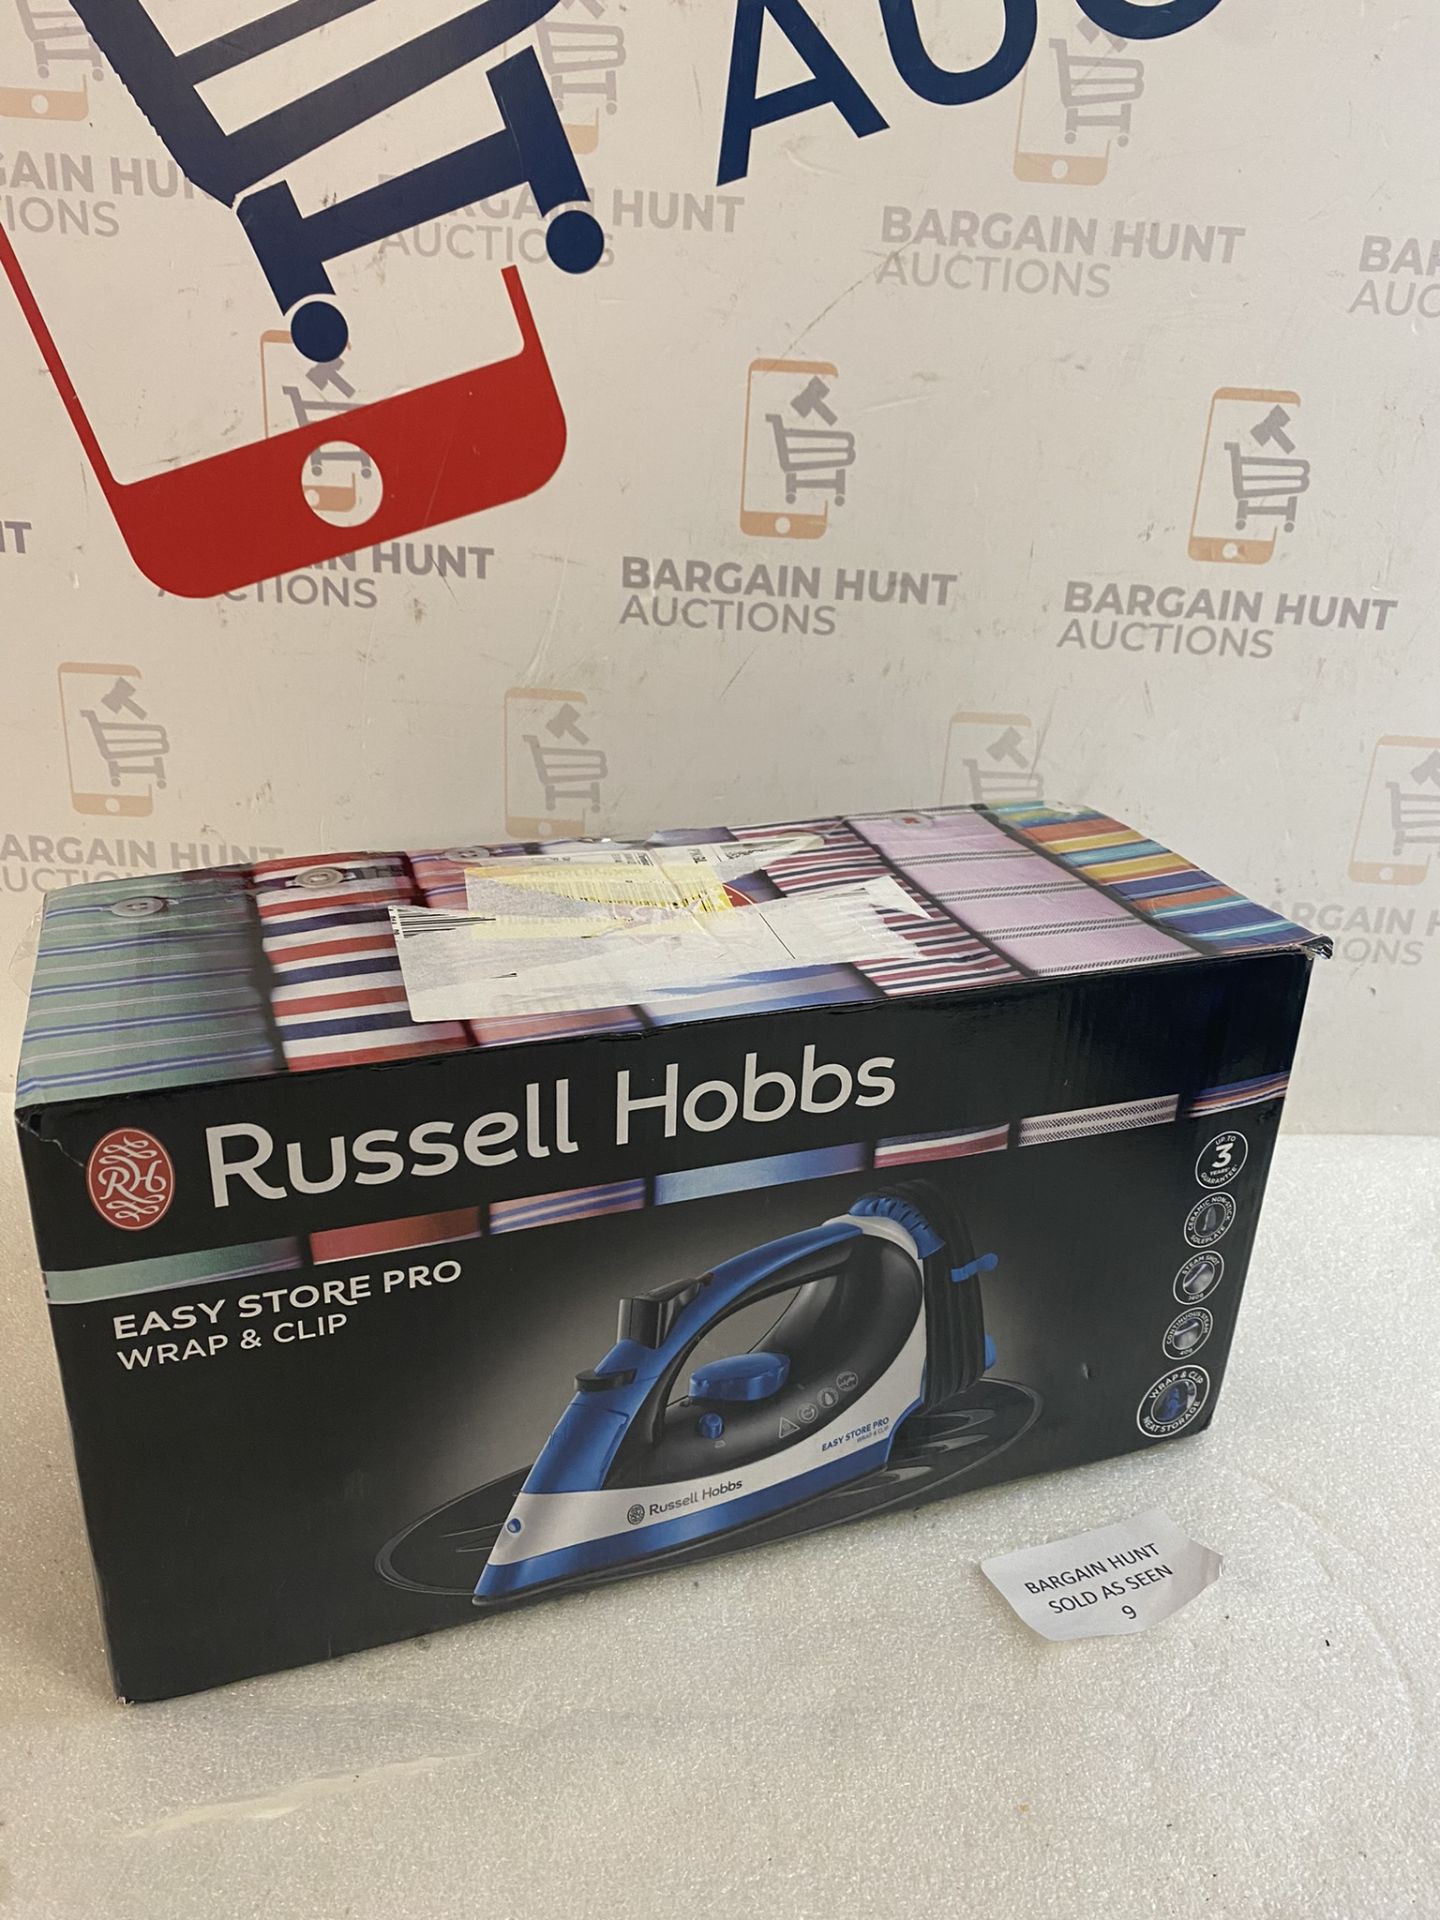 Russell Hobbs 23770 Easy Store Wrap & Clip Handheld Steam Iron RRP £29.99